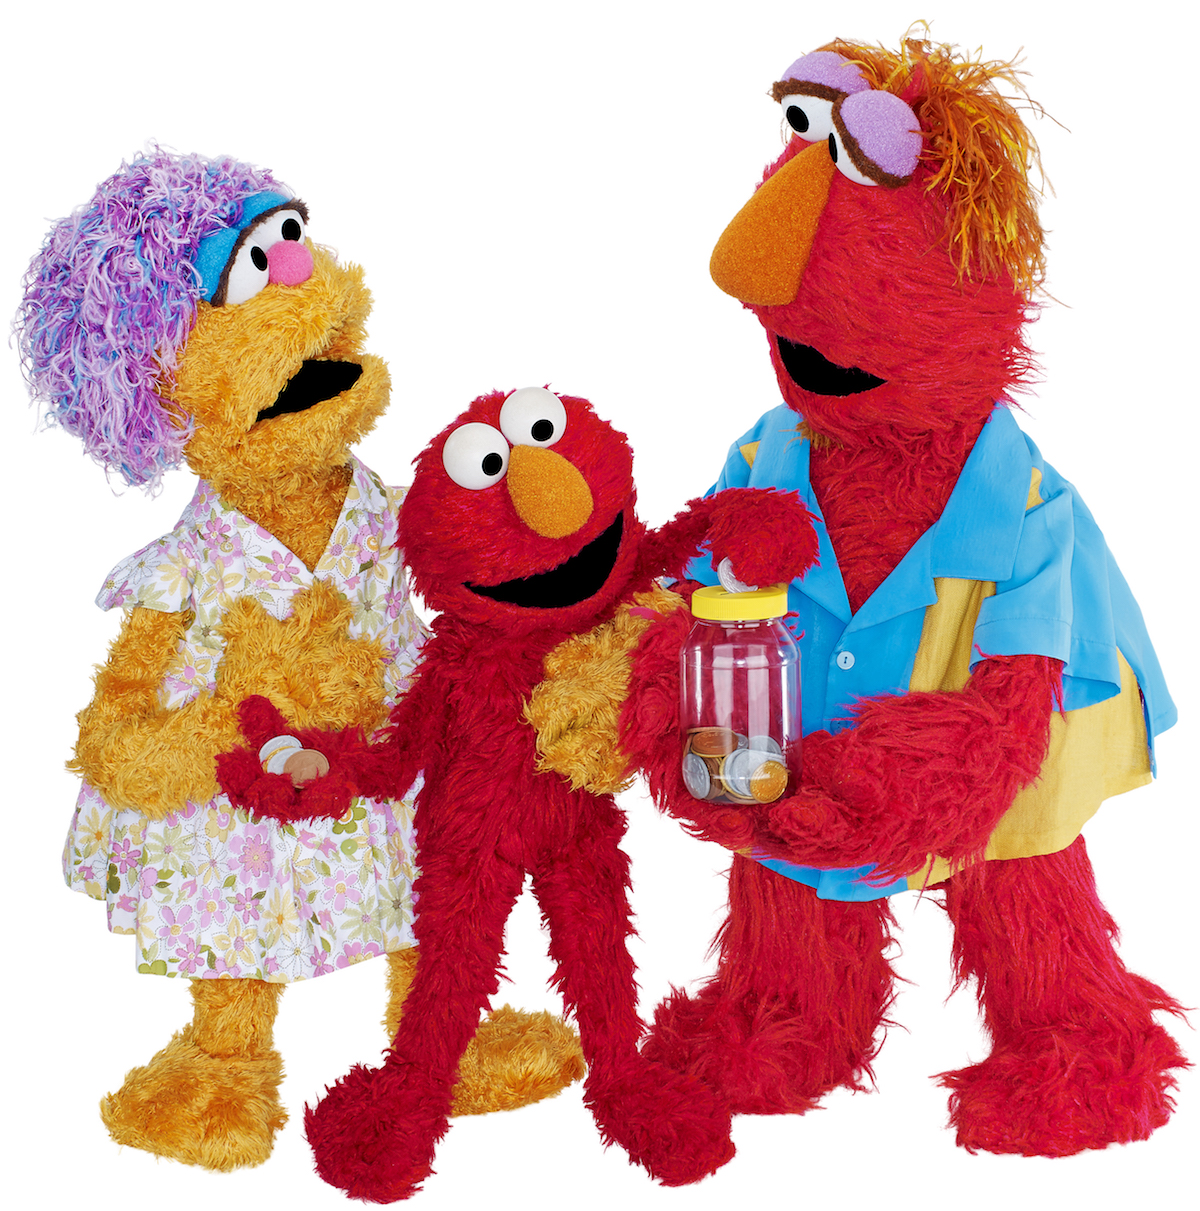 Initiative Featuring Sesame Street Muppets to Reach Families in Japan, Mexi...